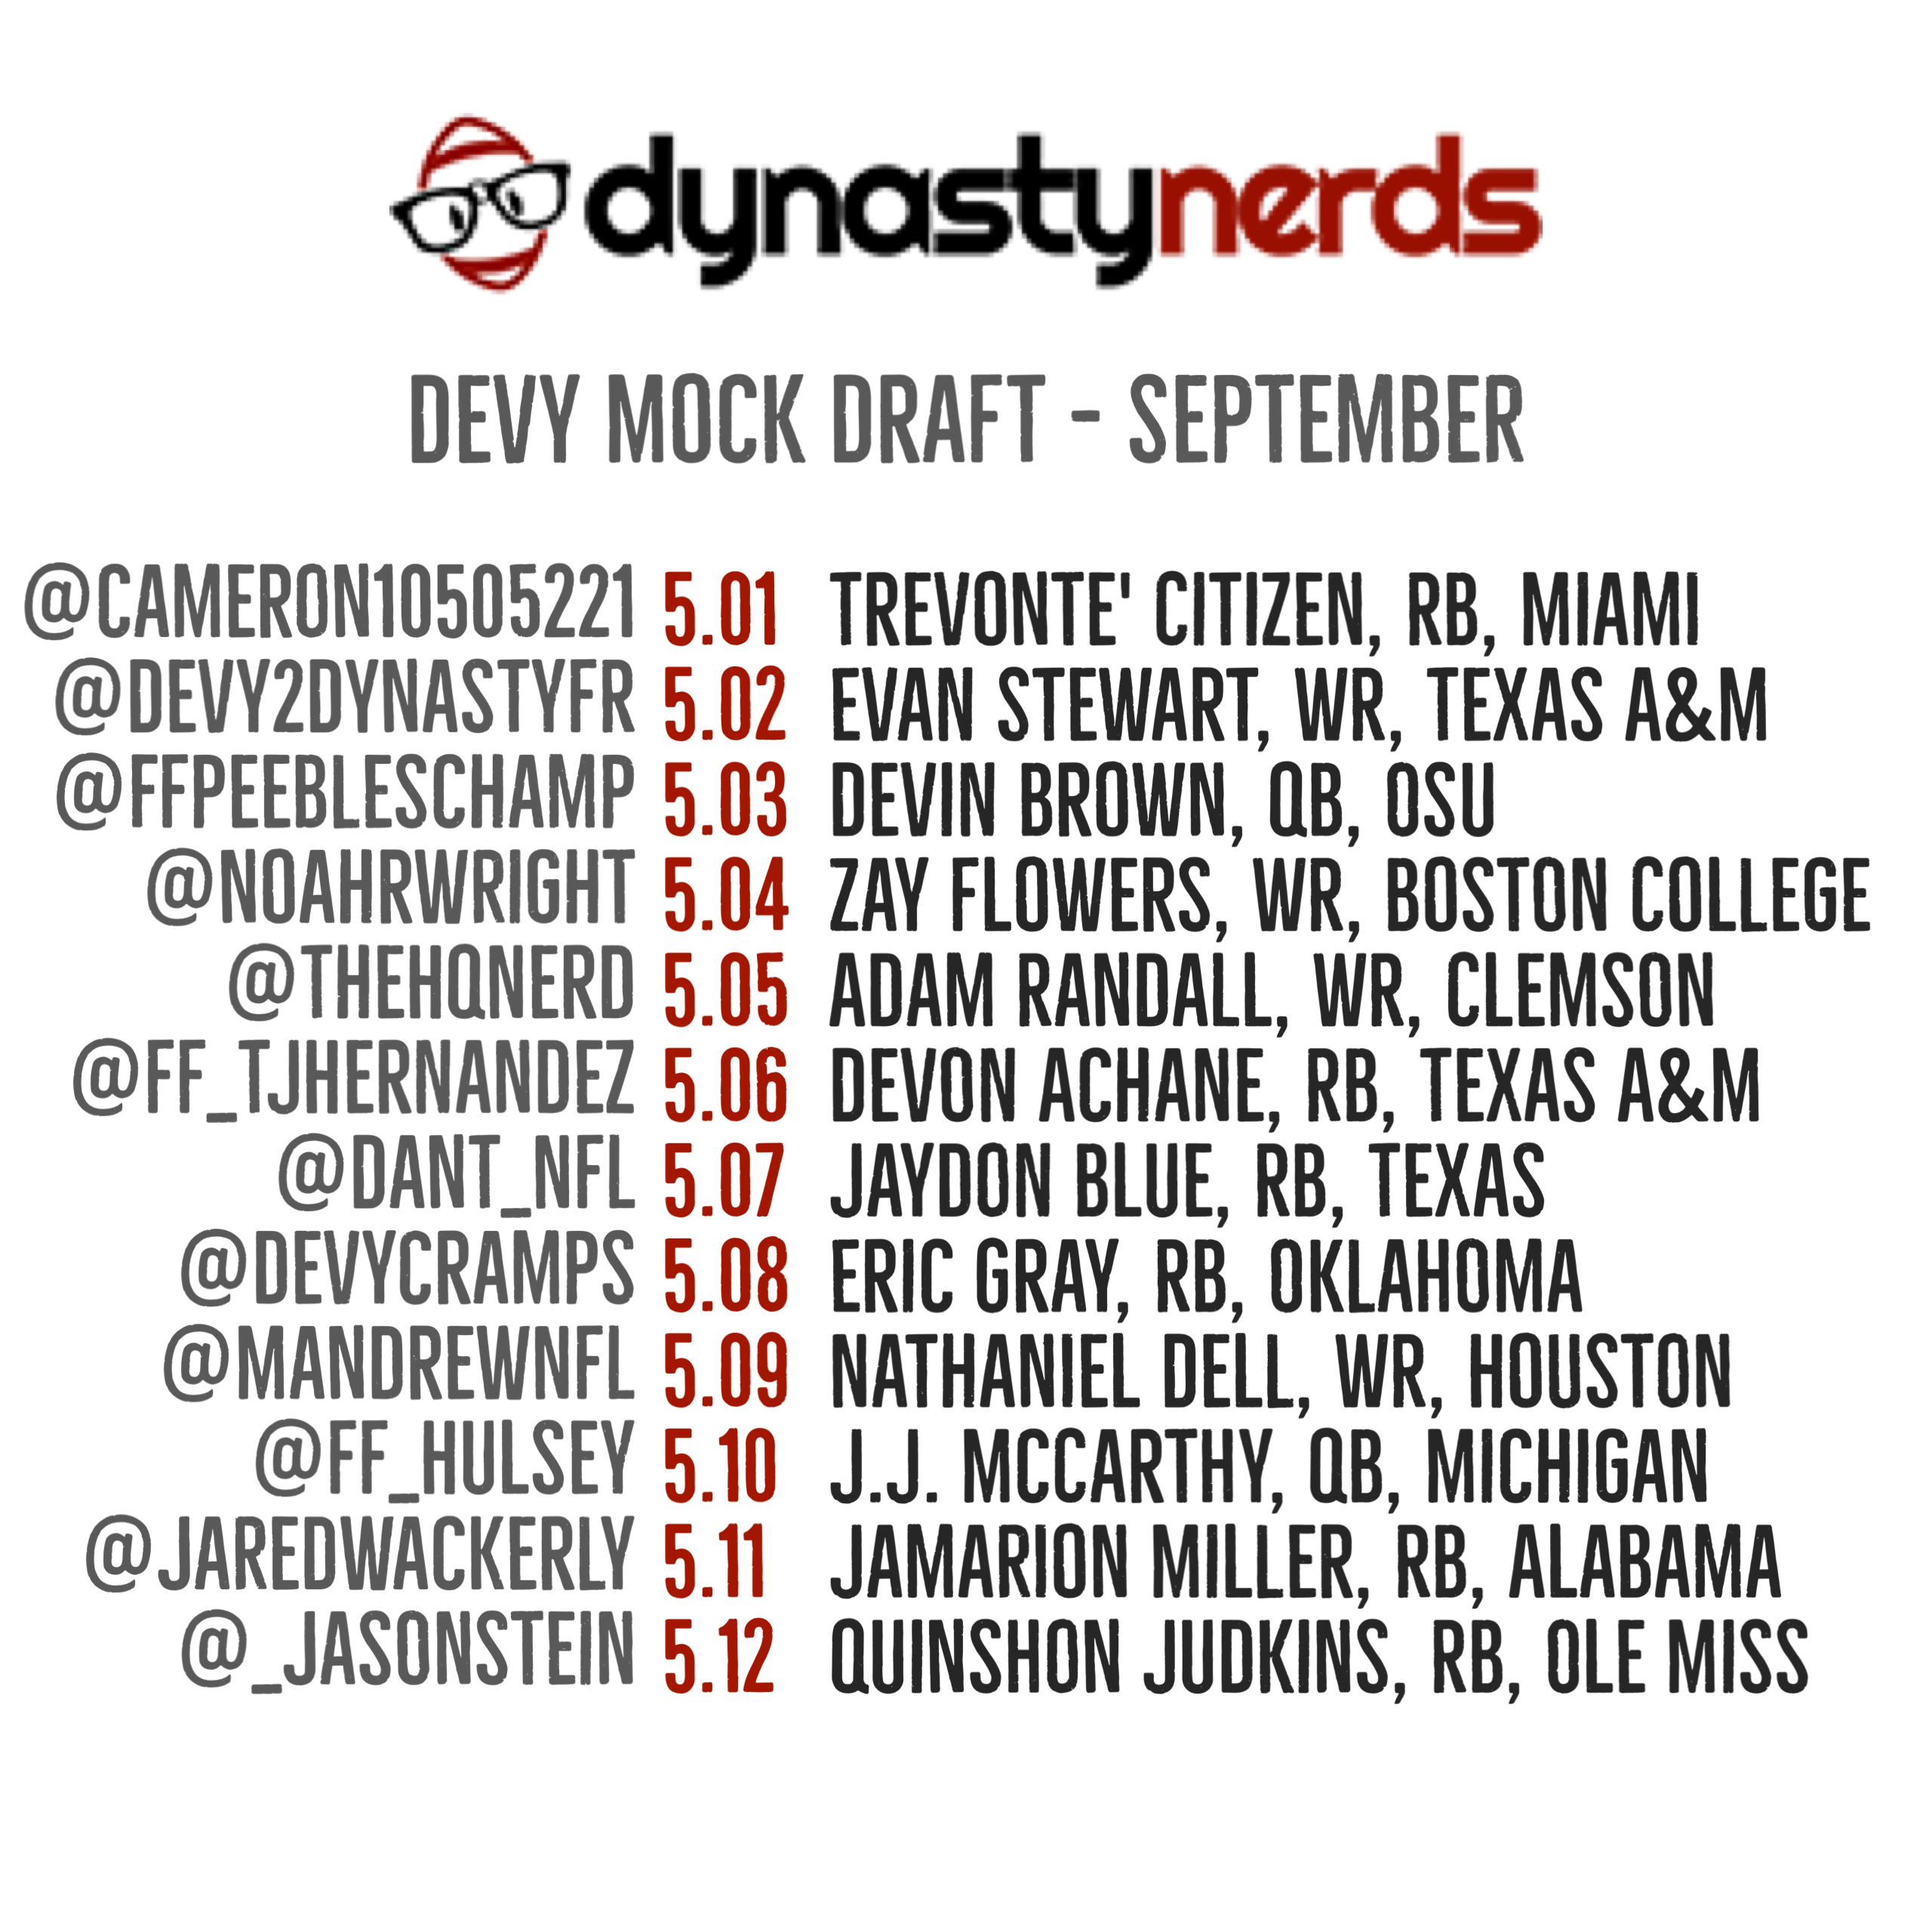 Assessing Nerds Staff Draft ADP After Release of Mock Draft 7.0 - Dynasty  Nerds